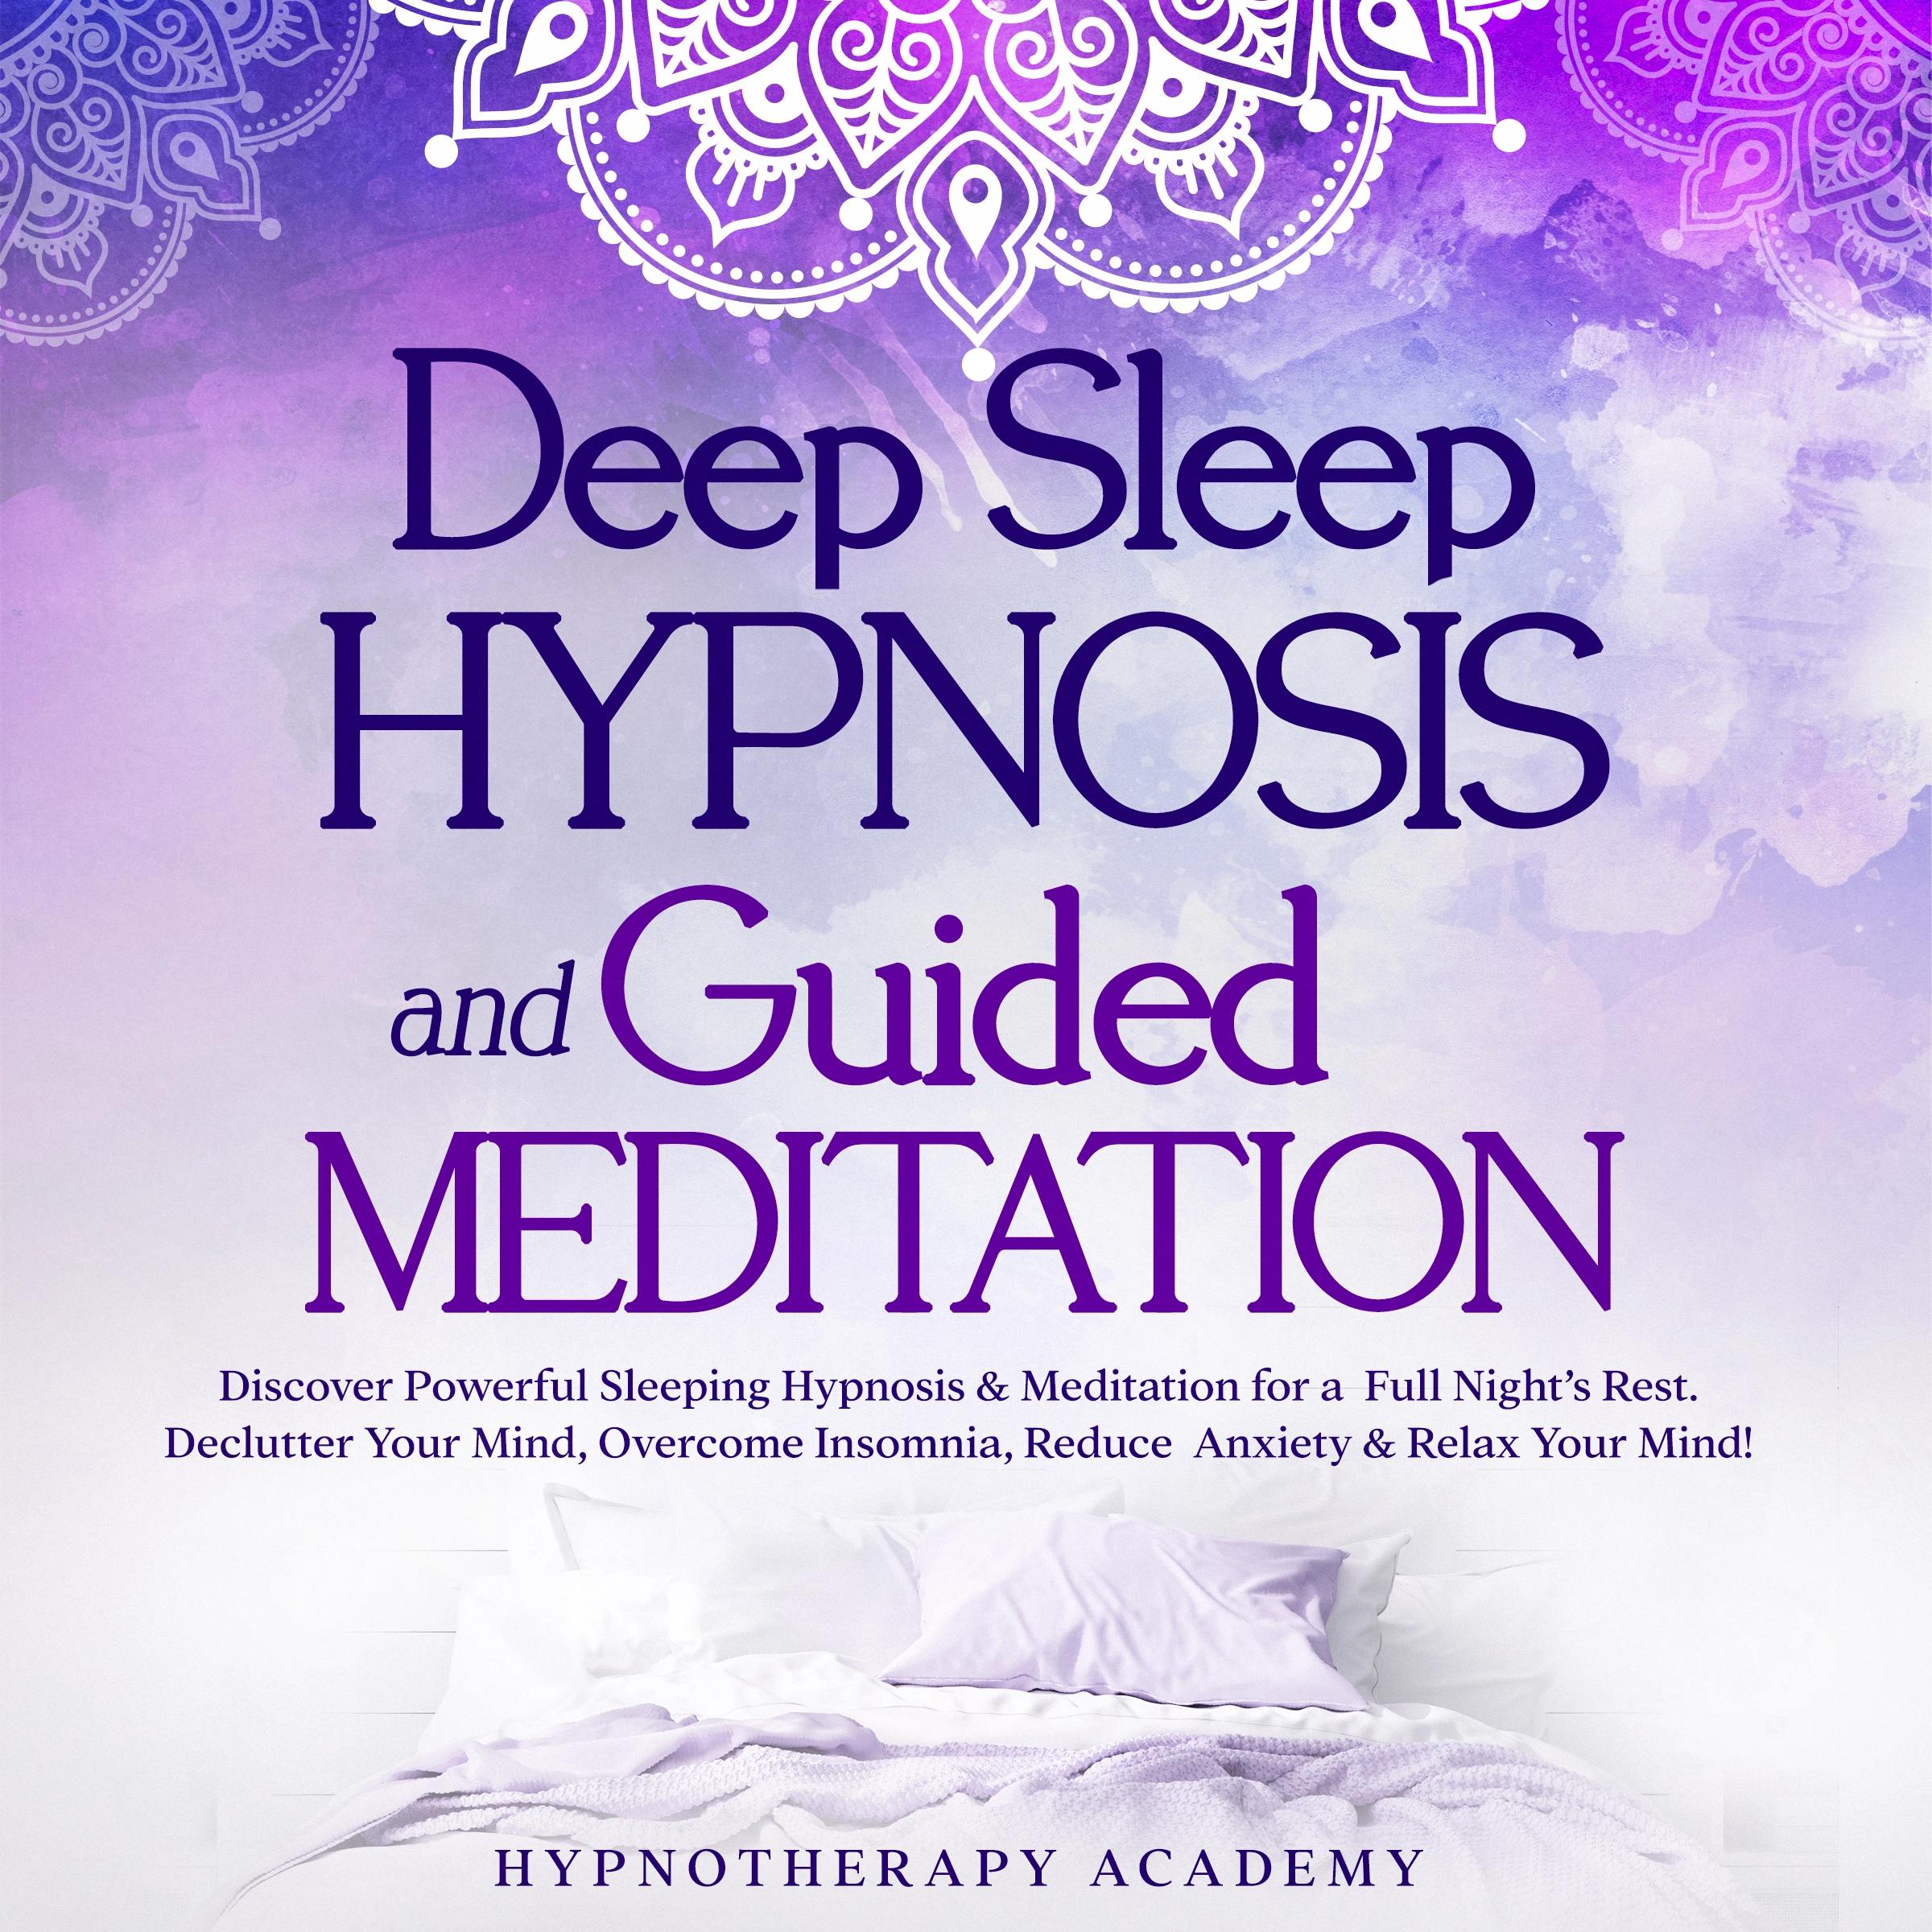 Deep Sleep Hypnosis and Guided Meditation: Discover Powerful Sleeping Hypnosis & Meditation for a Full Night’s Rest. Declutter Your Mind, Overcome Insomnia, Reduce Anxiety & Relax Your Mind! by Hypnotherapy Academy Audiobook